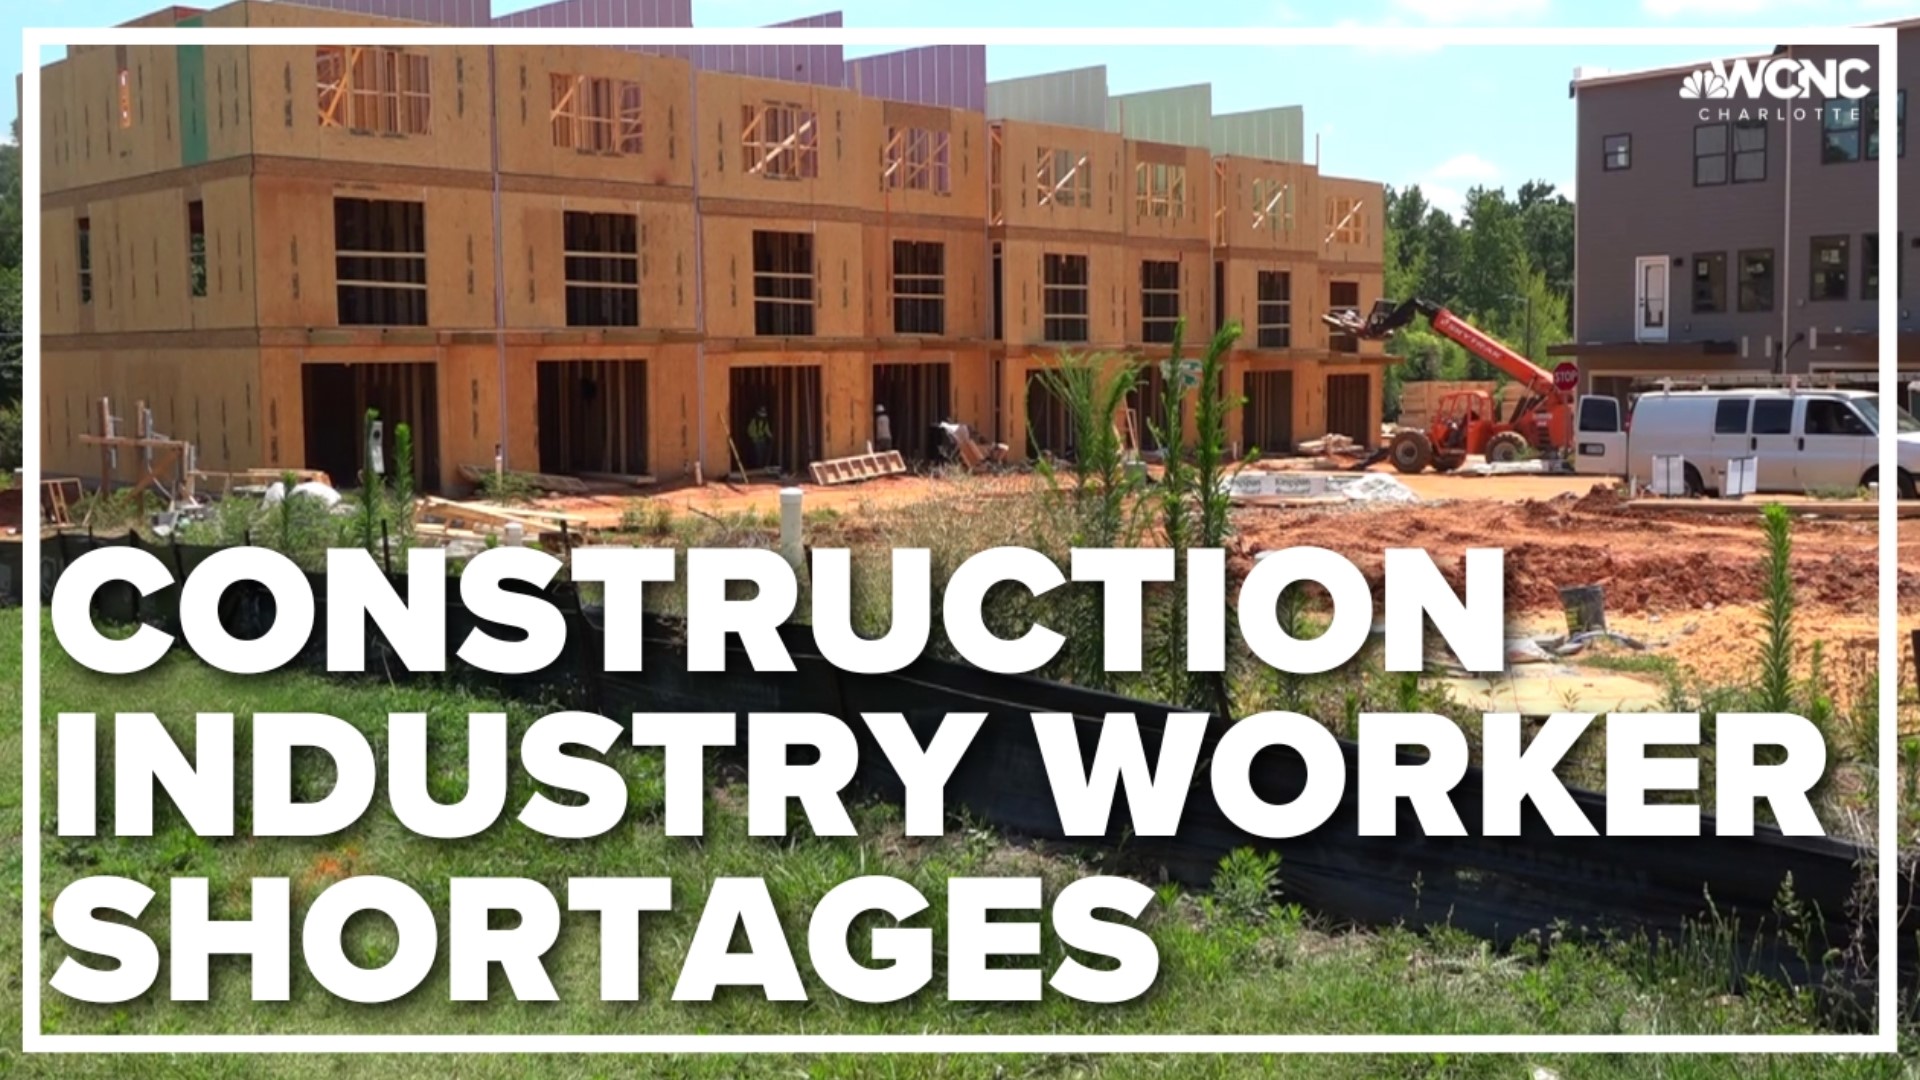 Builders are facing two big challenges these days: a shortage of materials and a shortage of labor in all trades.